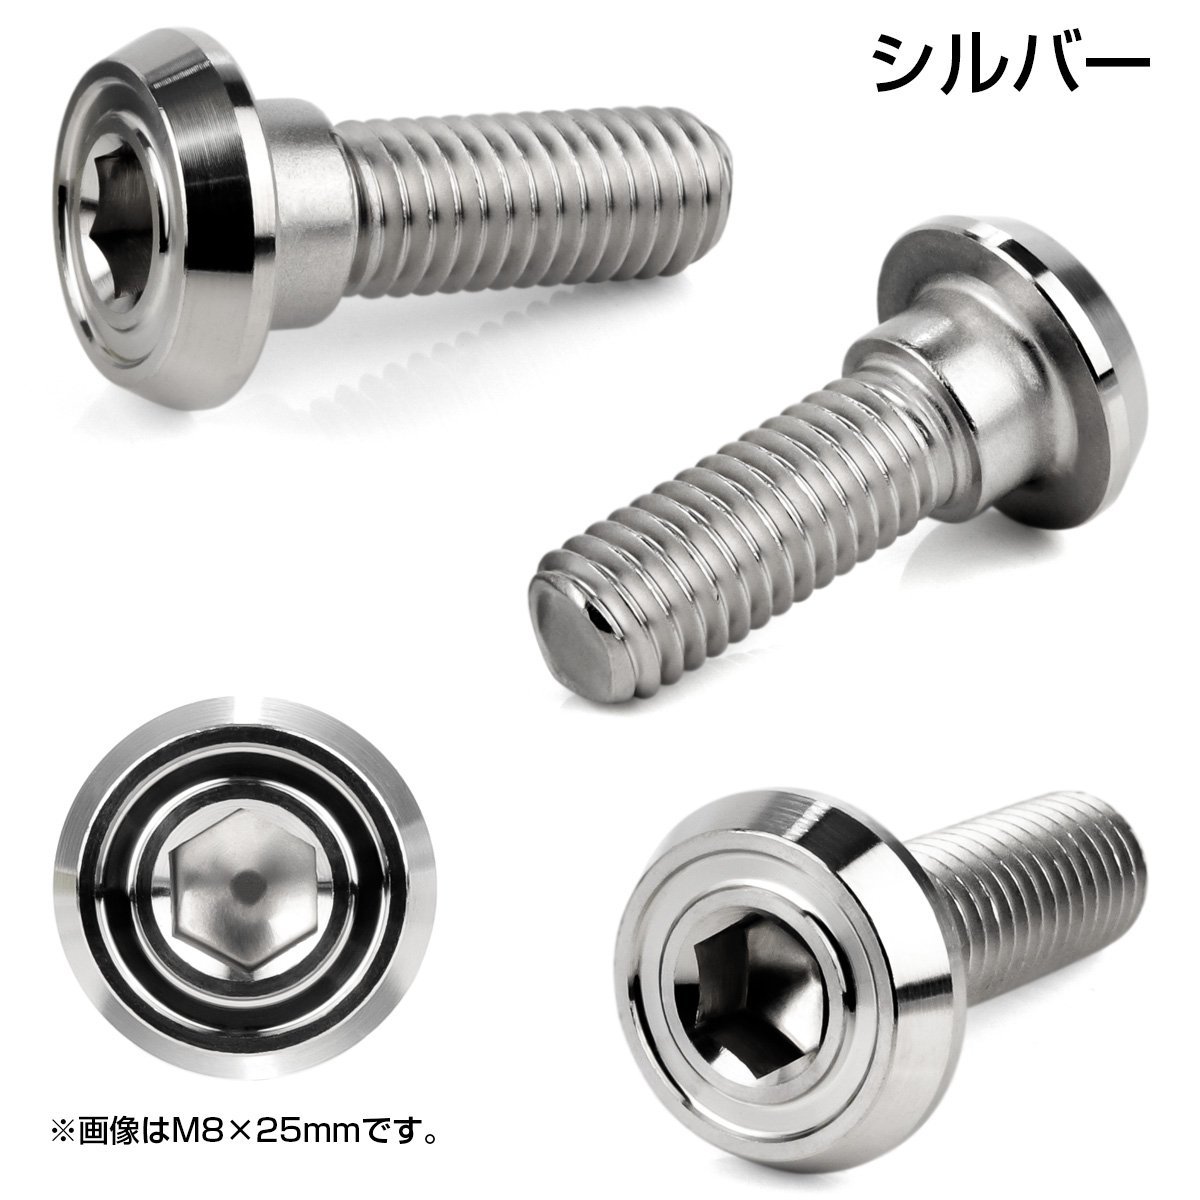  brake disk rotor bolt Honda for M8×25mm P=1.25 stainless steel Flat Head mat type AA silver TD0201